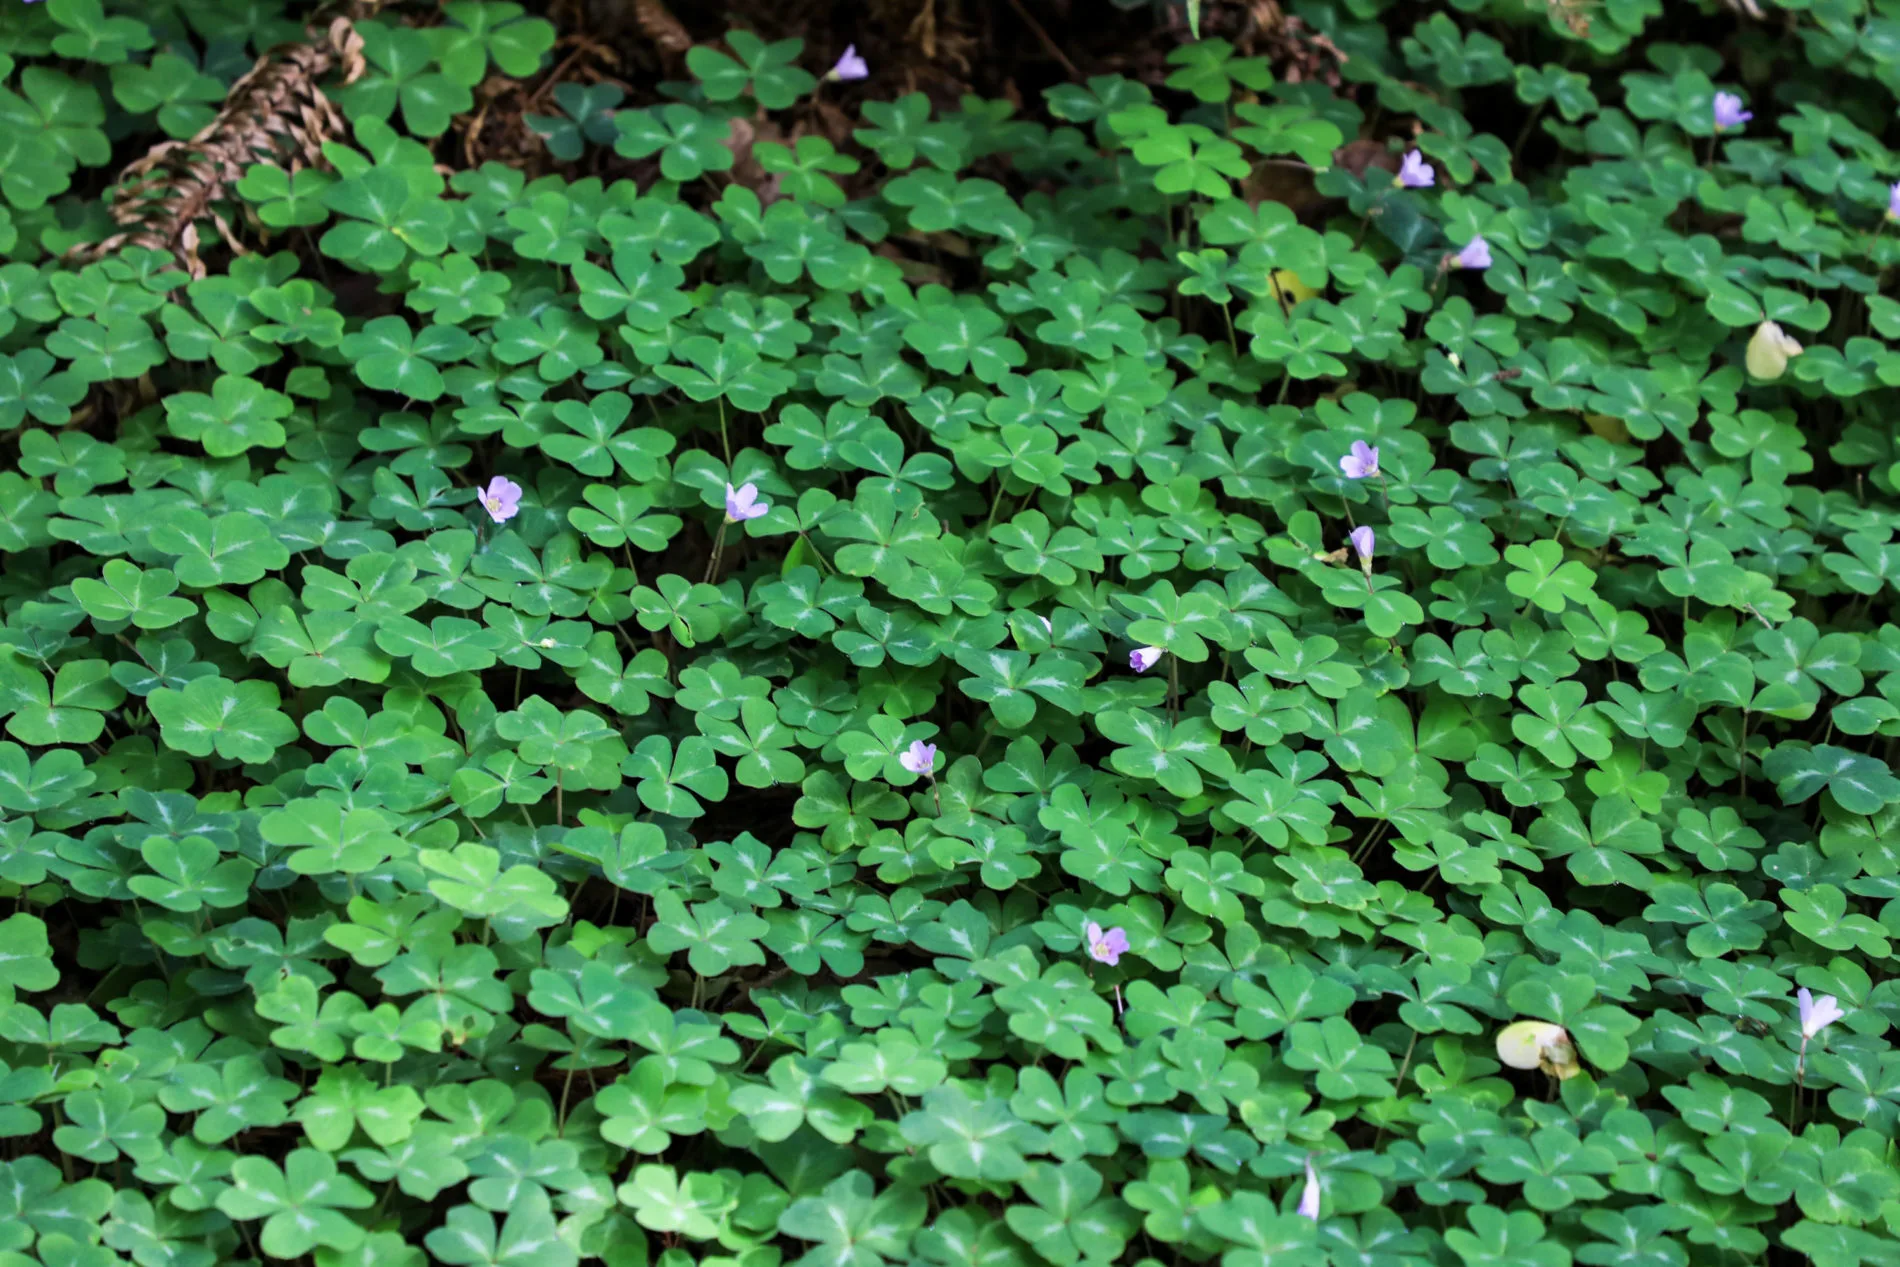 Redwood sorrel on the forest floor. It’s a ground cover with small pink flowers and leaves similar to clover.